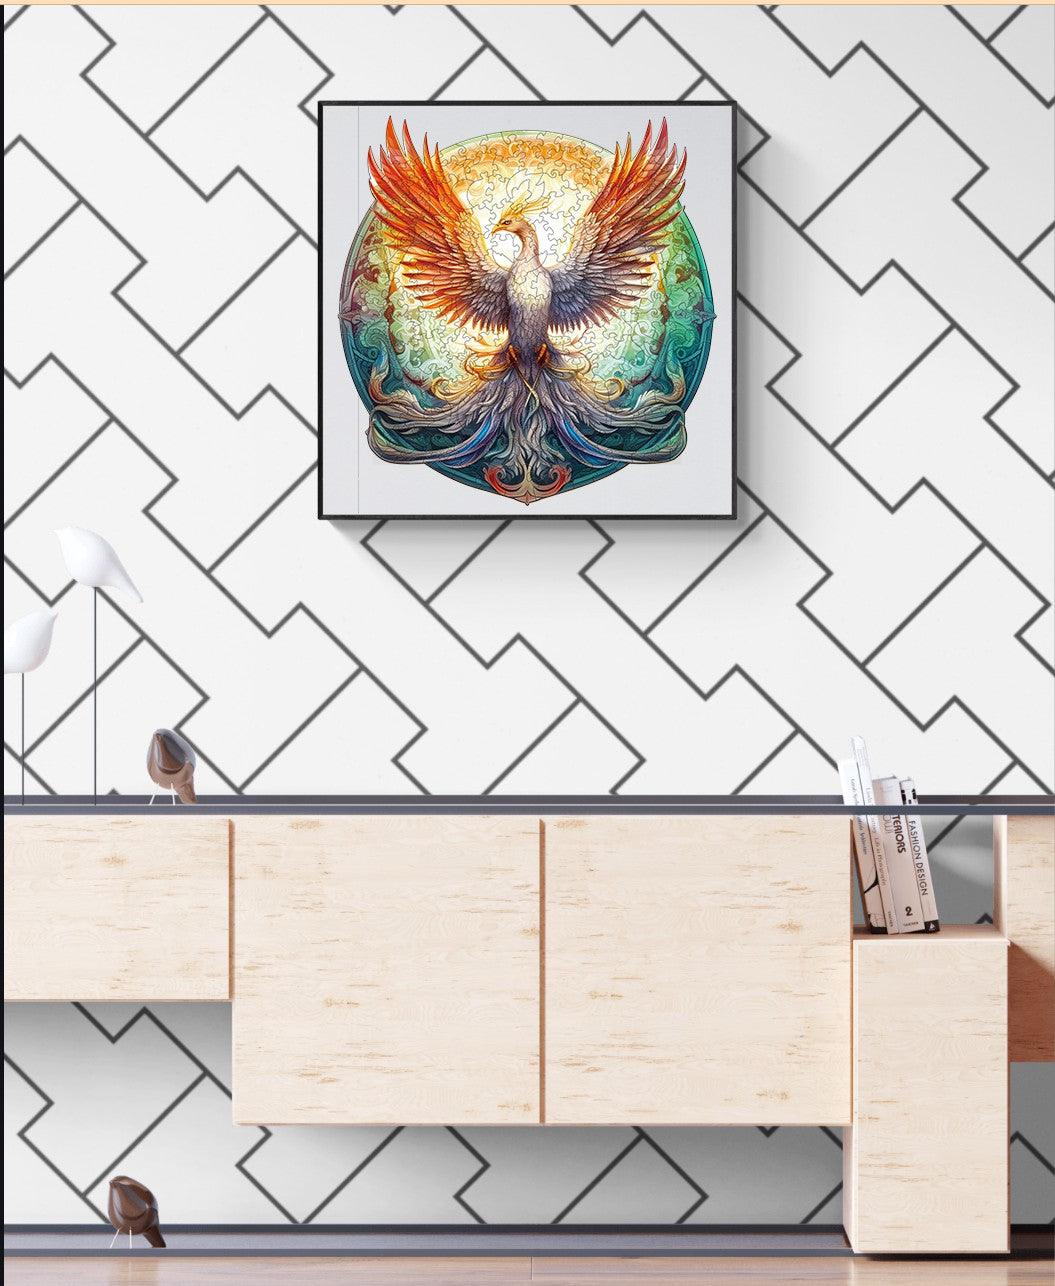 Mysterious Phoenix Wooden Jigsaw Puzzle-Woodbests